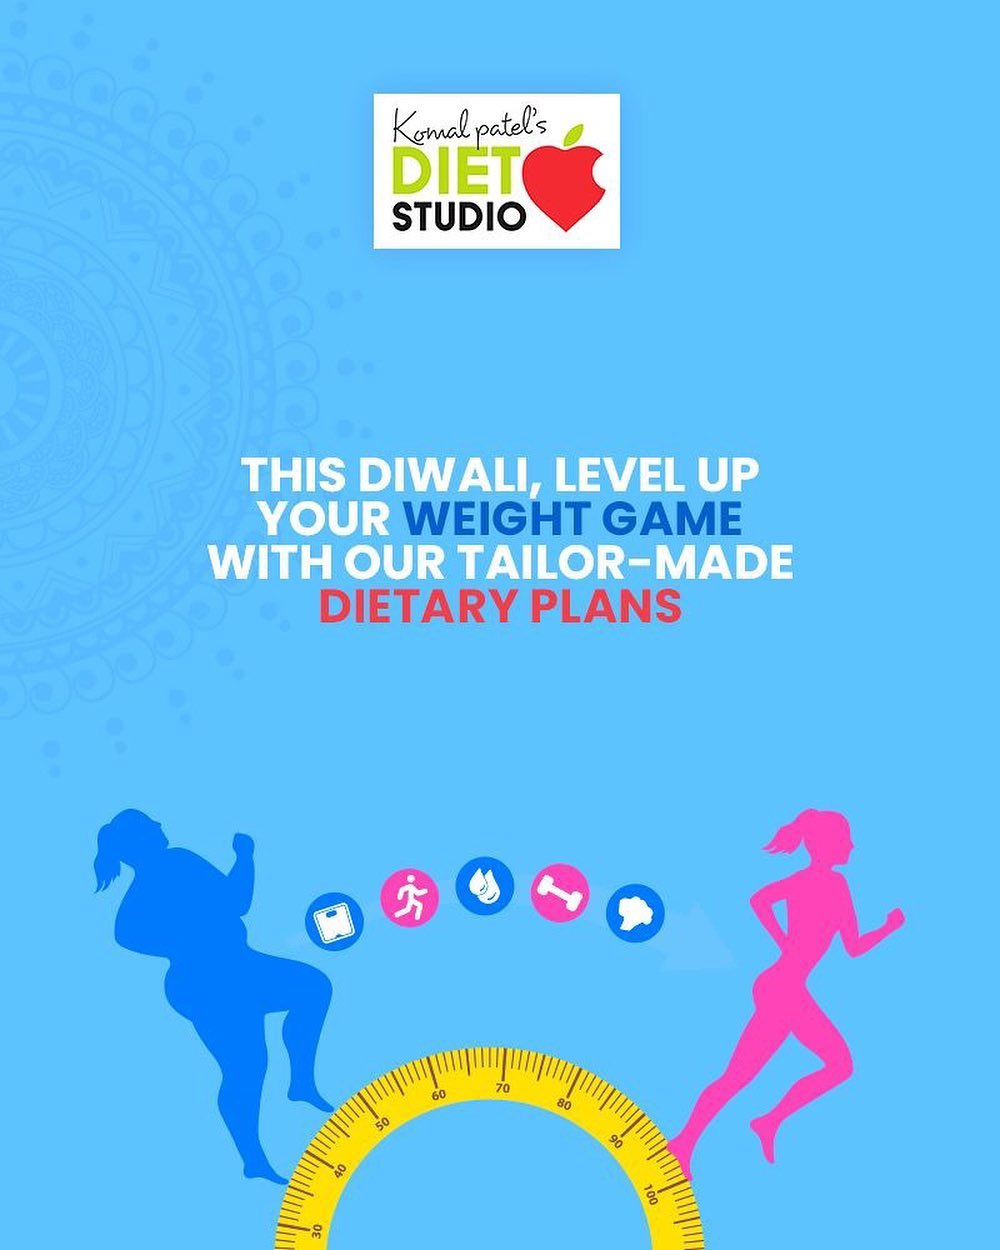 Diwali, the festival of lights, is just around the corner, which means it is that time of the year again when you’re surrounded by savoury dishes and irresistible sweets feet not and level up your weight game with our tailor-made dietary plans. 
#diwali #diwalisweets #photoshoot #sustitution #diwaligift #komalpatel #healthysweet #energyballs #guiltfree